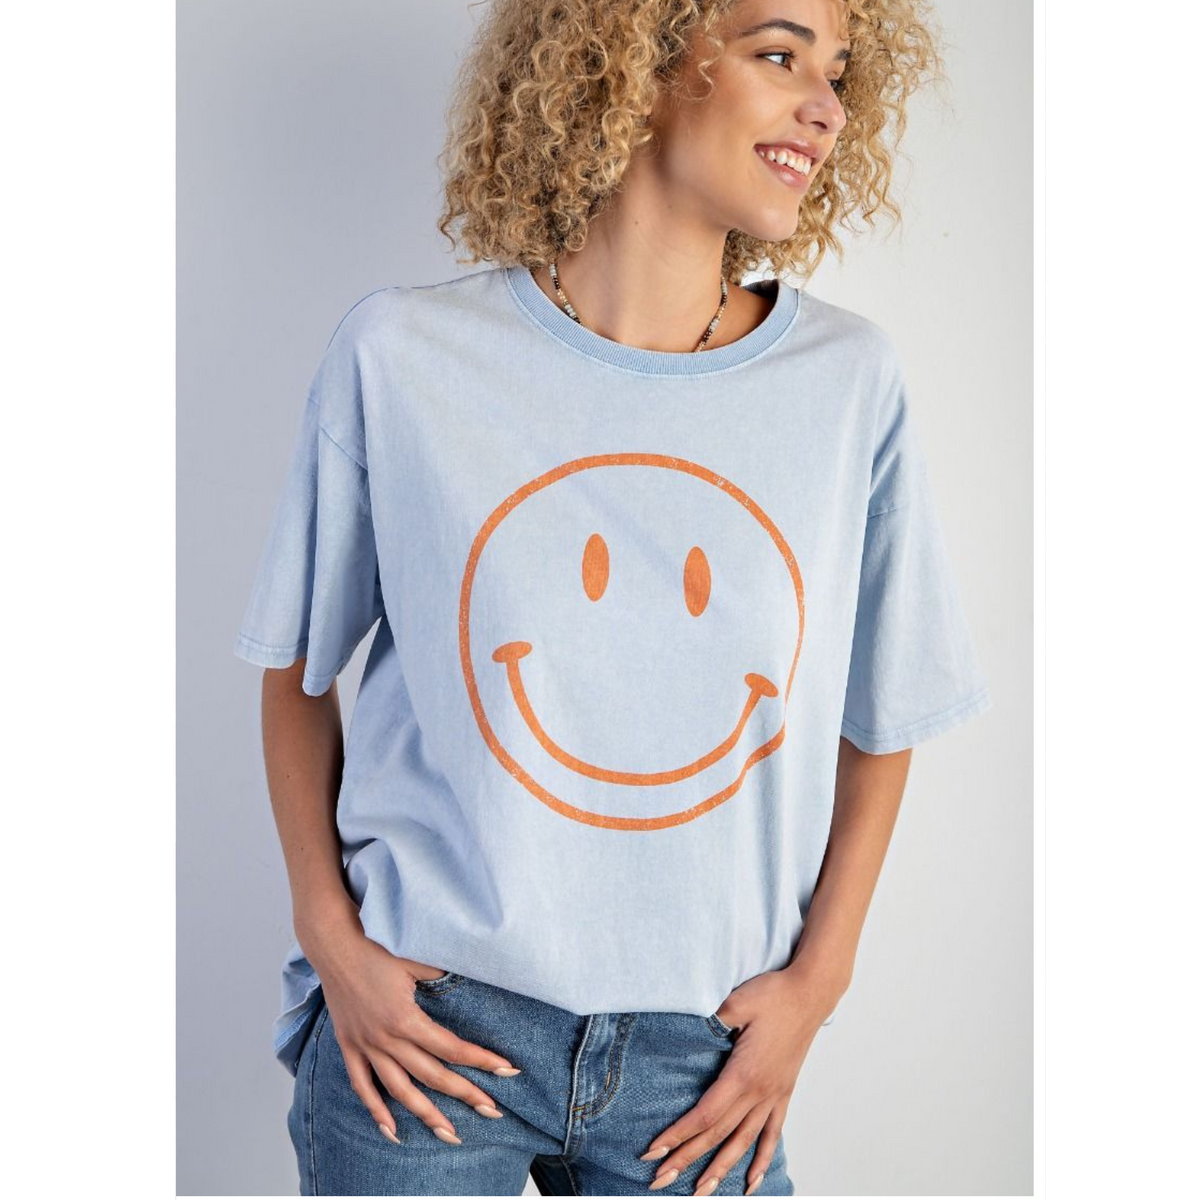 Mineral Washed Smiley Face Tee